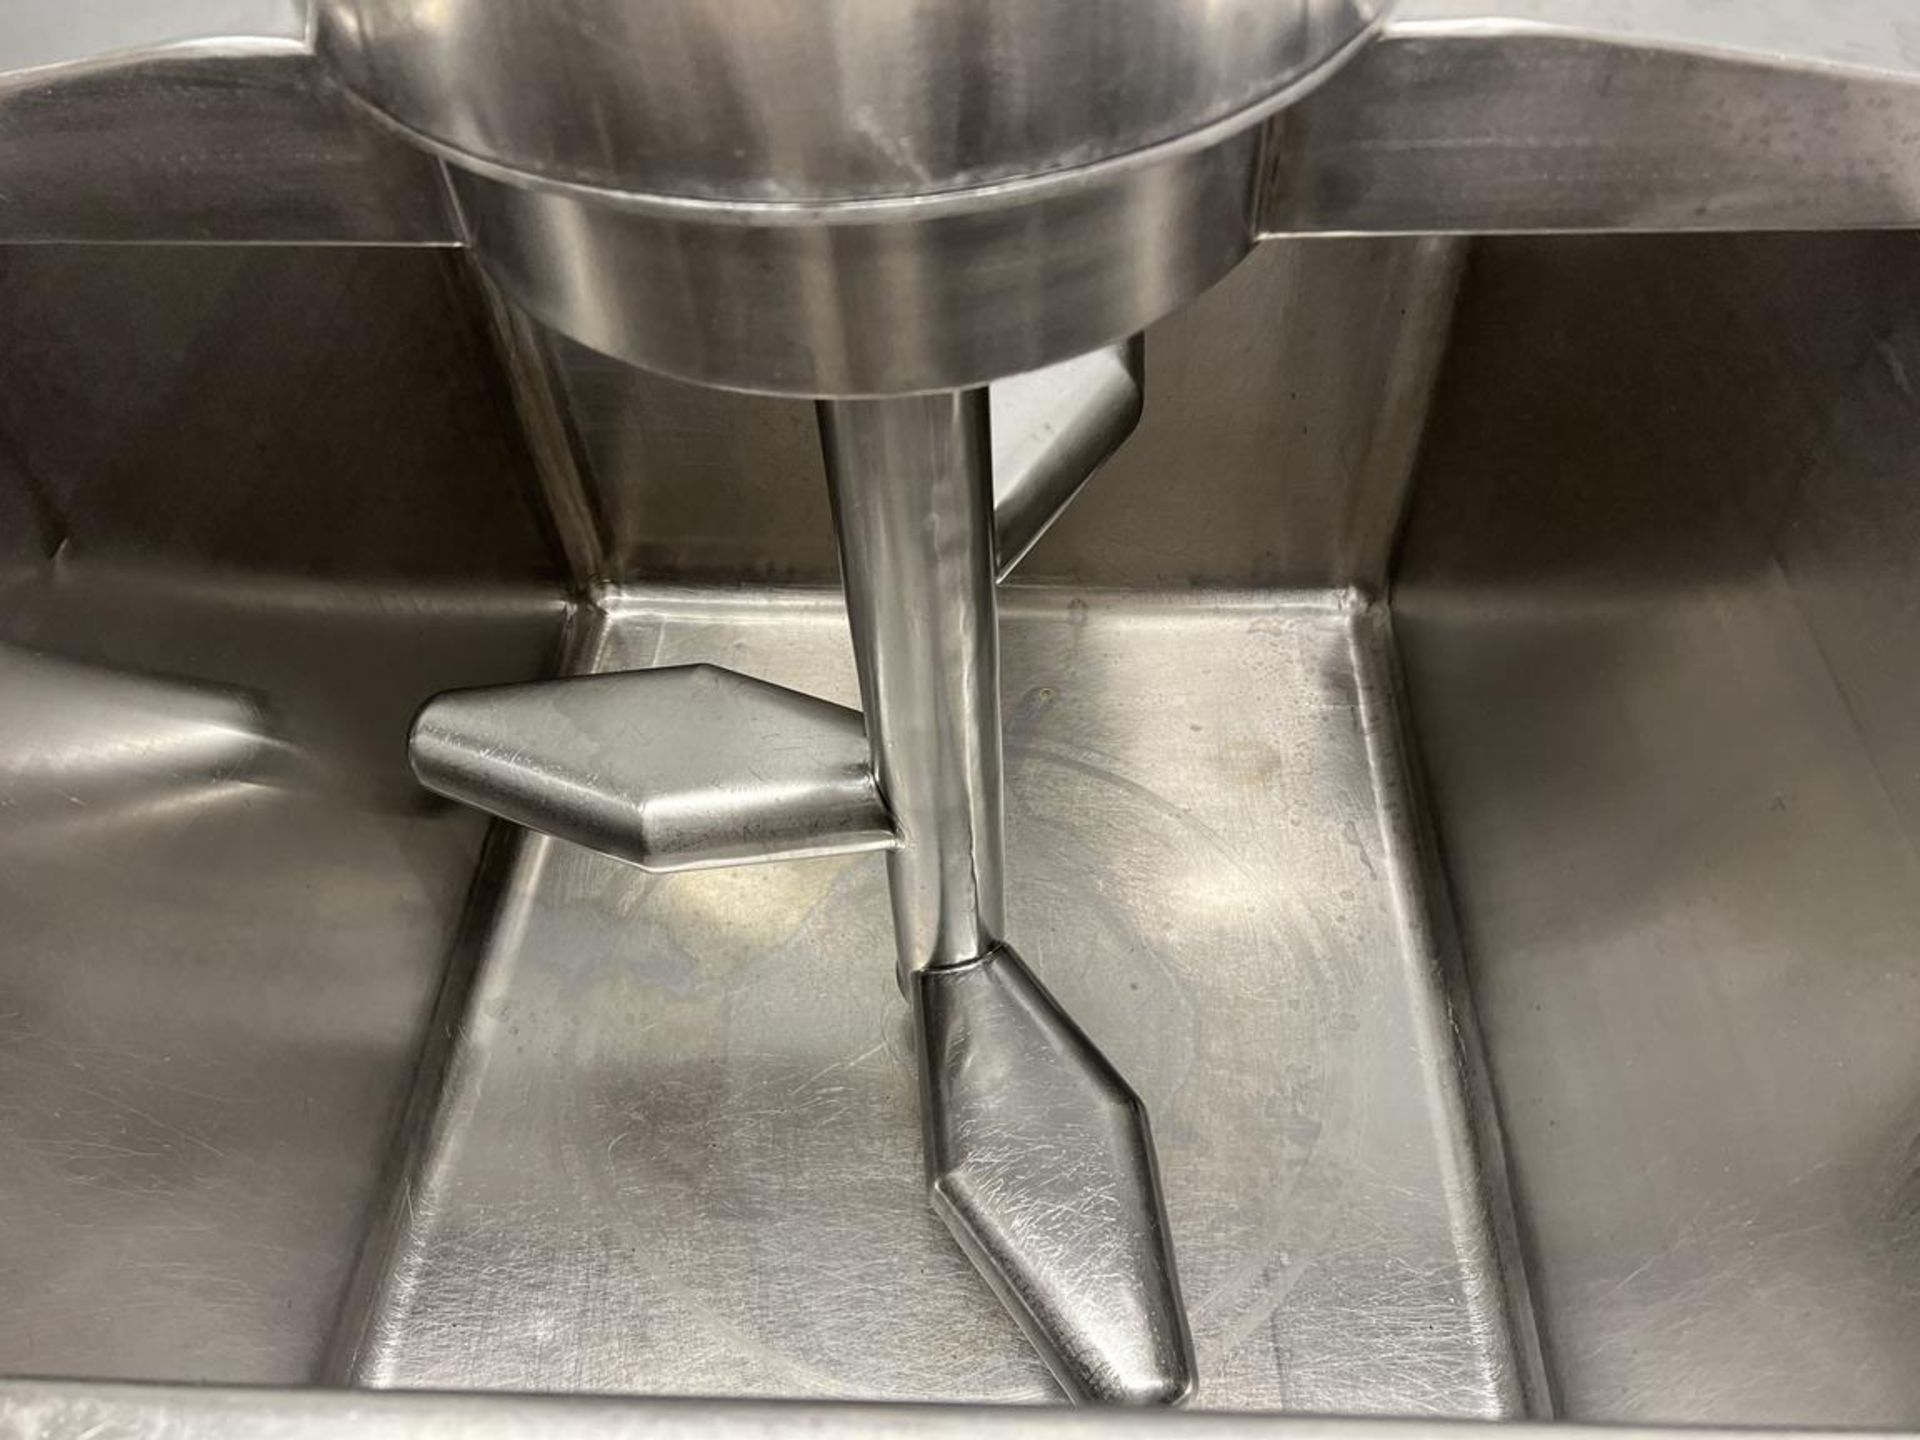 All stainless steel 236kg stainless steel paddle mixers, 415v, base size 910mm x 1110 x 840mm - Image 2 of 3